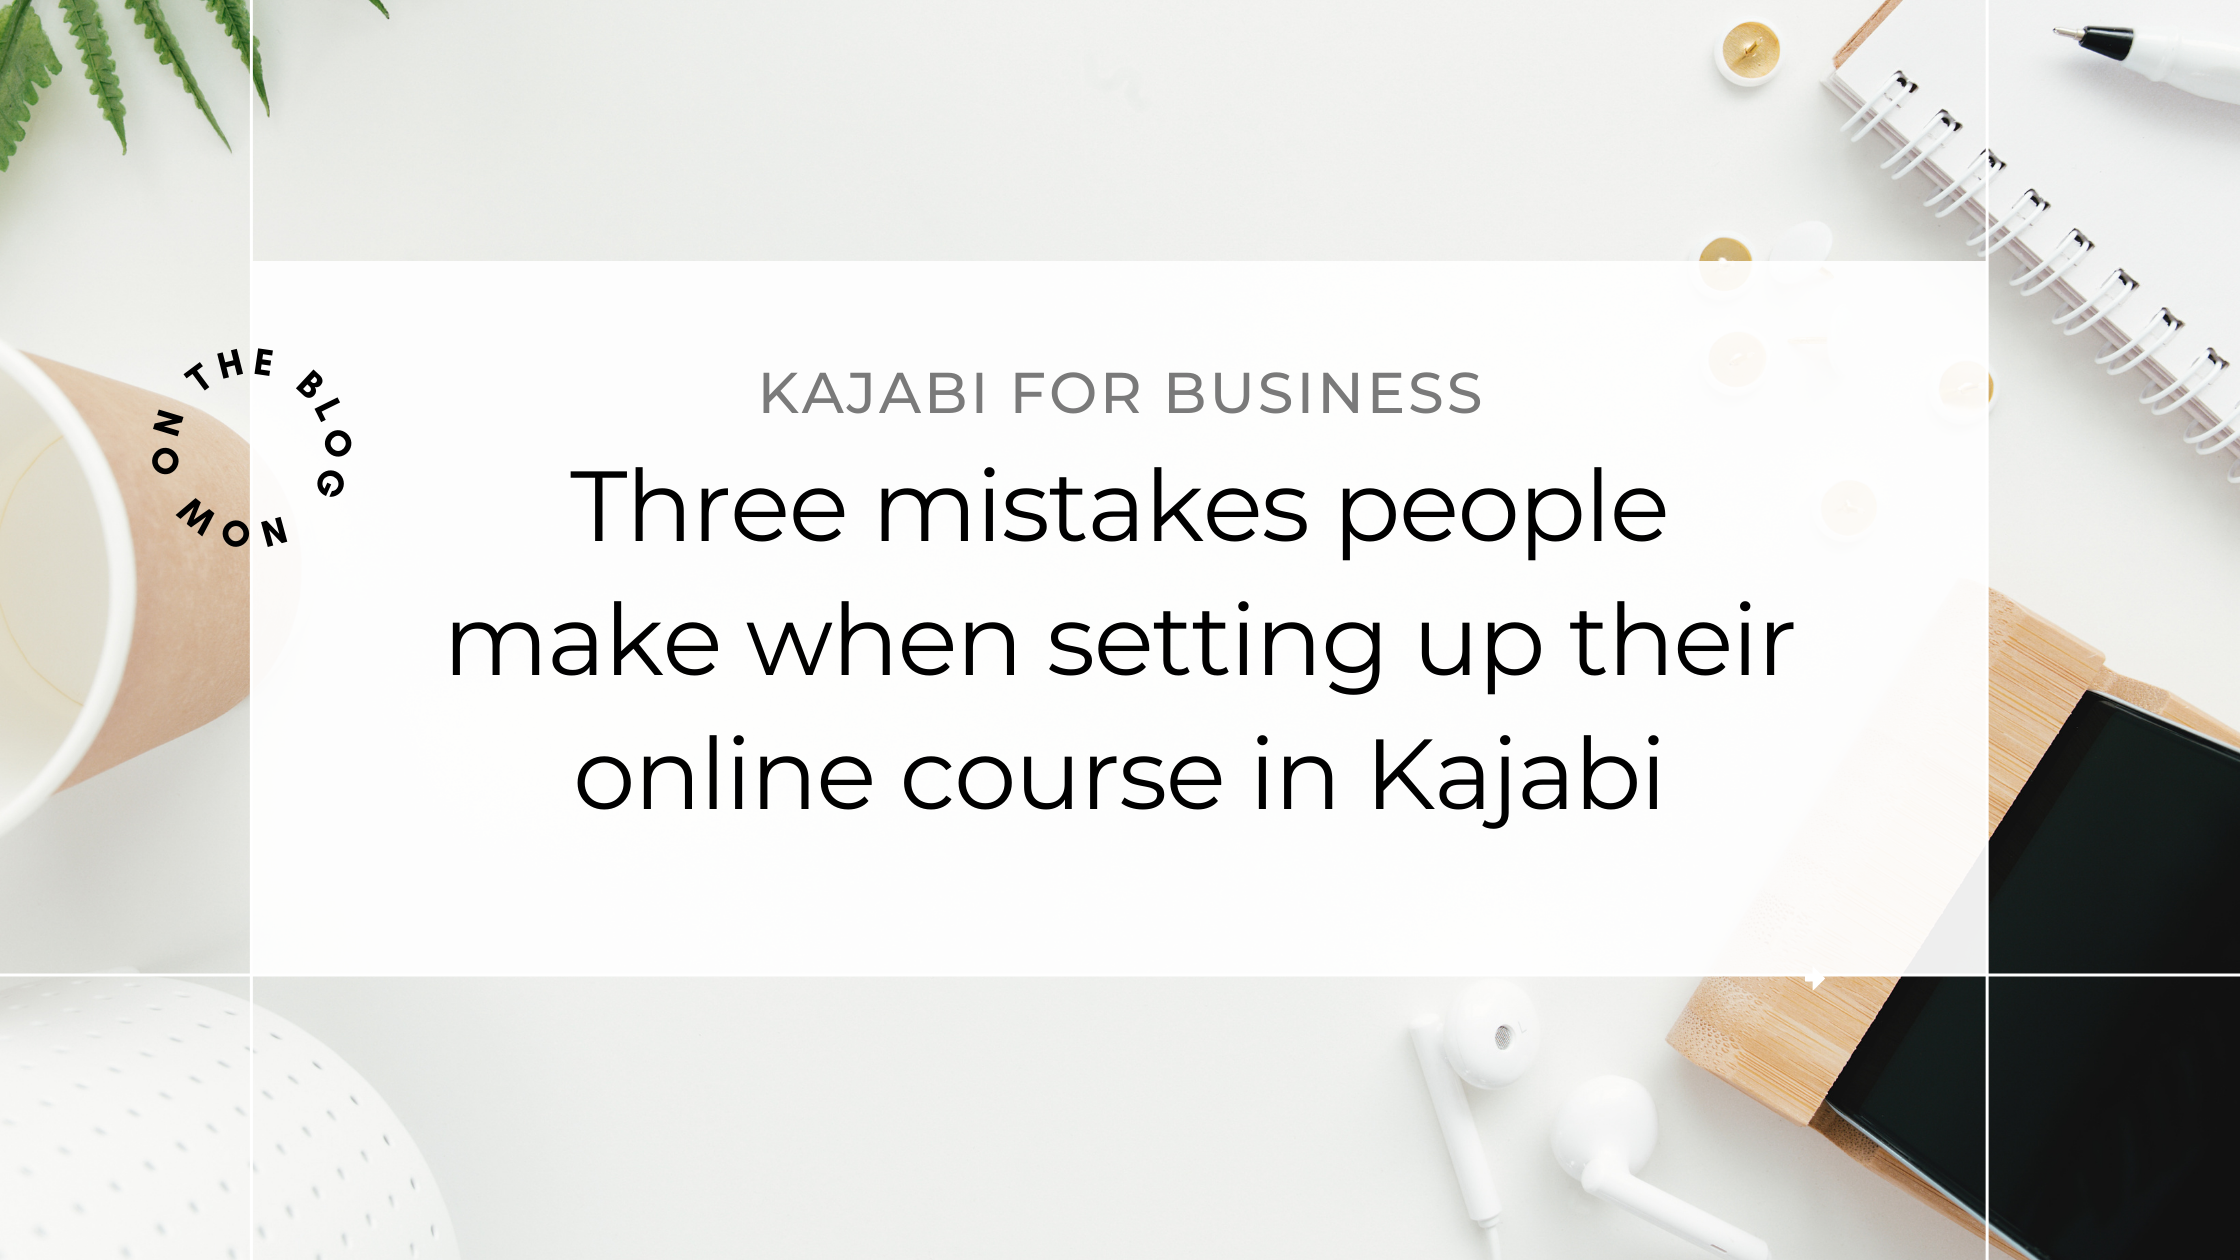 The Three Biggest Mistakes People Make When Setting Up Their Online Course in Kajabi